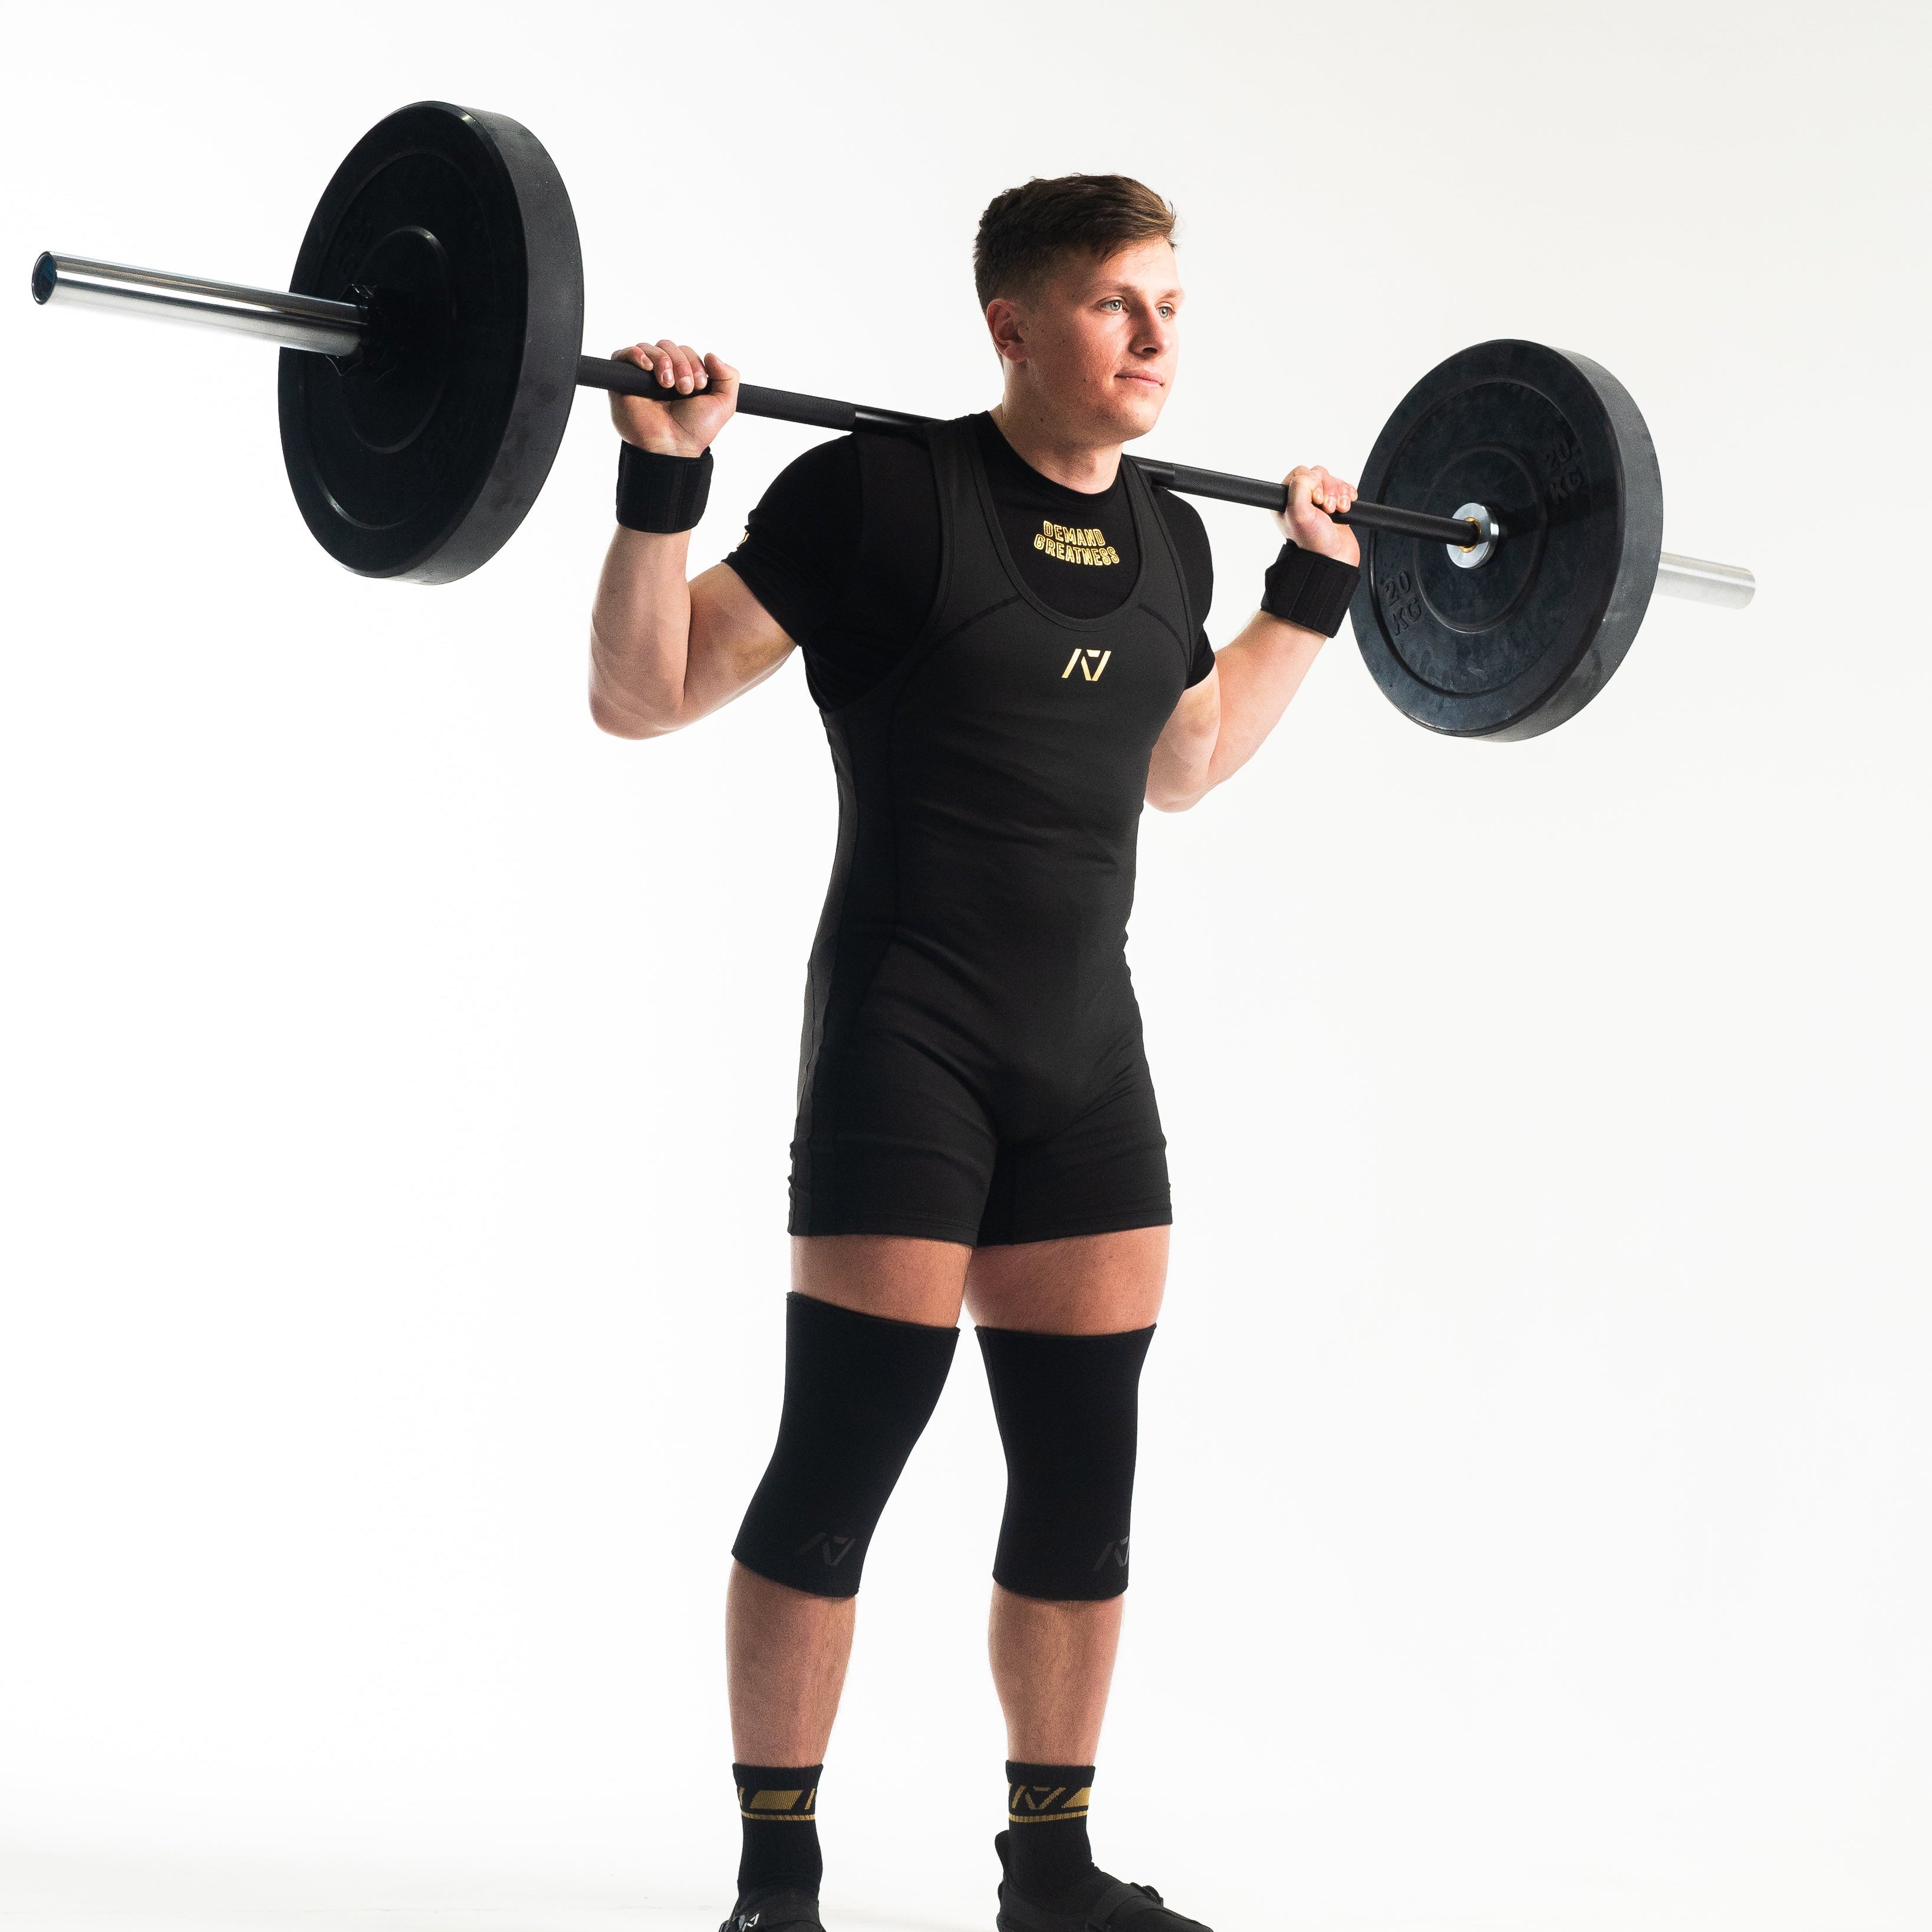 A7 IPF Approved Gold Standard Luno singlet features extra lat mobility, side panel stitching to guide the squat depth level and curved panel design for a slimming look. The Women's cut singlet features a tapered waist and additional quad room. The IPF Approved Kit includes Luno Powerlifting Singlet, A7 Meet Shirt, A7 Zebra Wrist Wraps, A7 Deadlift Socks, Hourglass Knee Sleeves (Stiff Knee Sleeves and Rigor Mortis Knee Sleeves). All A7 Powerlifting Equipment shipping to UK, Norway, Switzerland and Iceland.